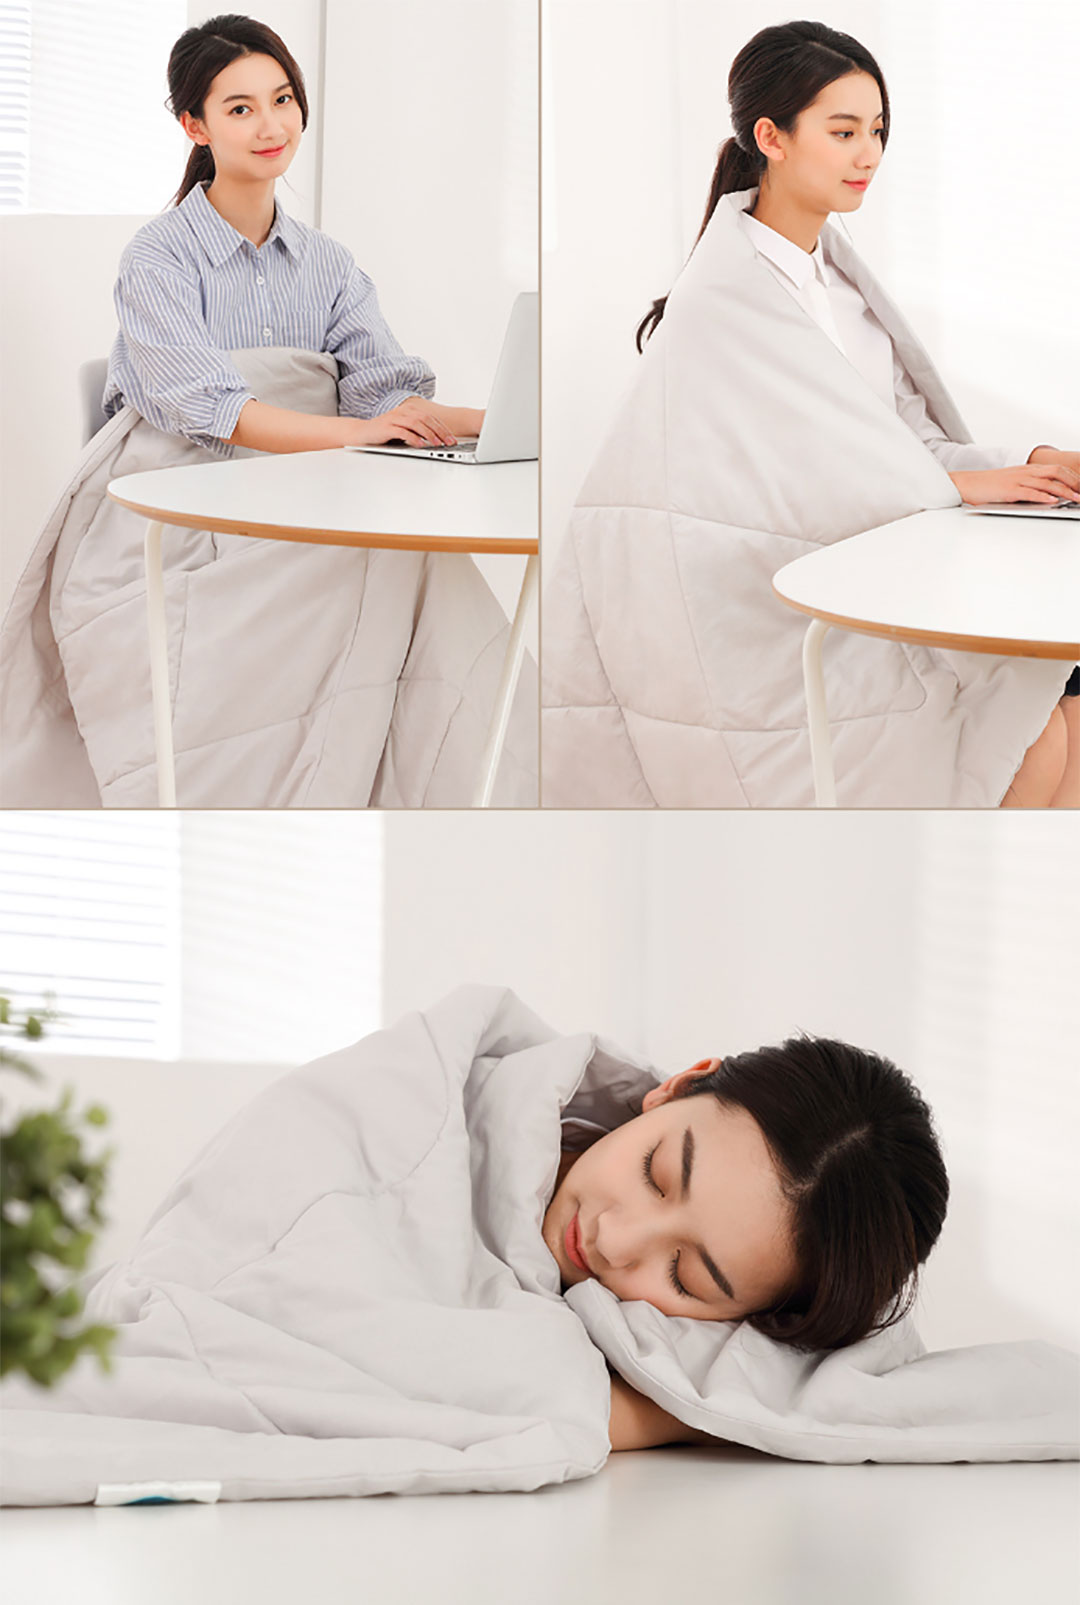 Xiaomi 8H Washable Cotton Anti-Bacterial Cooling Blanket BX